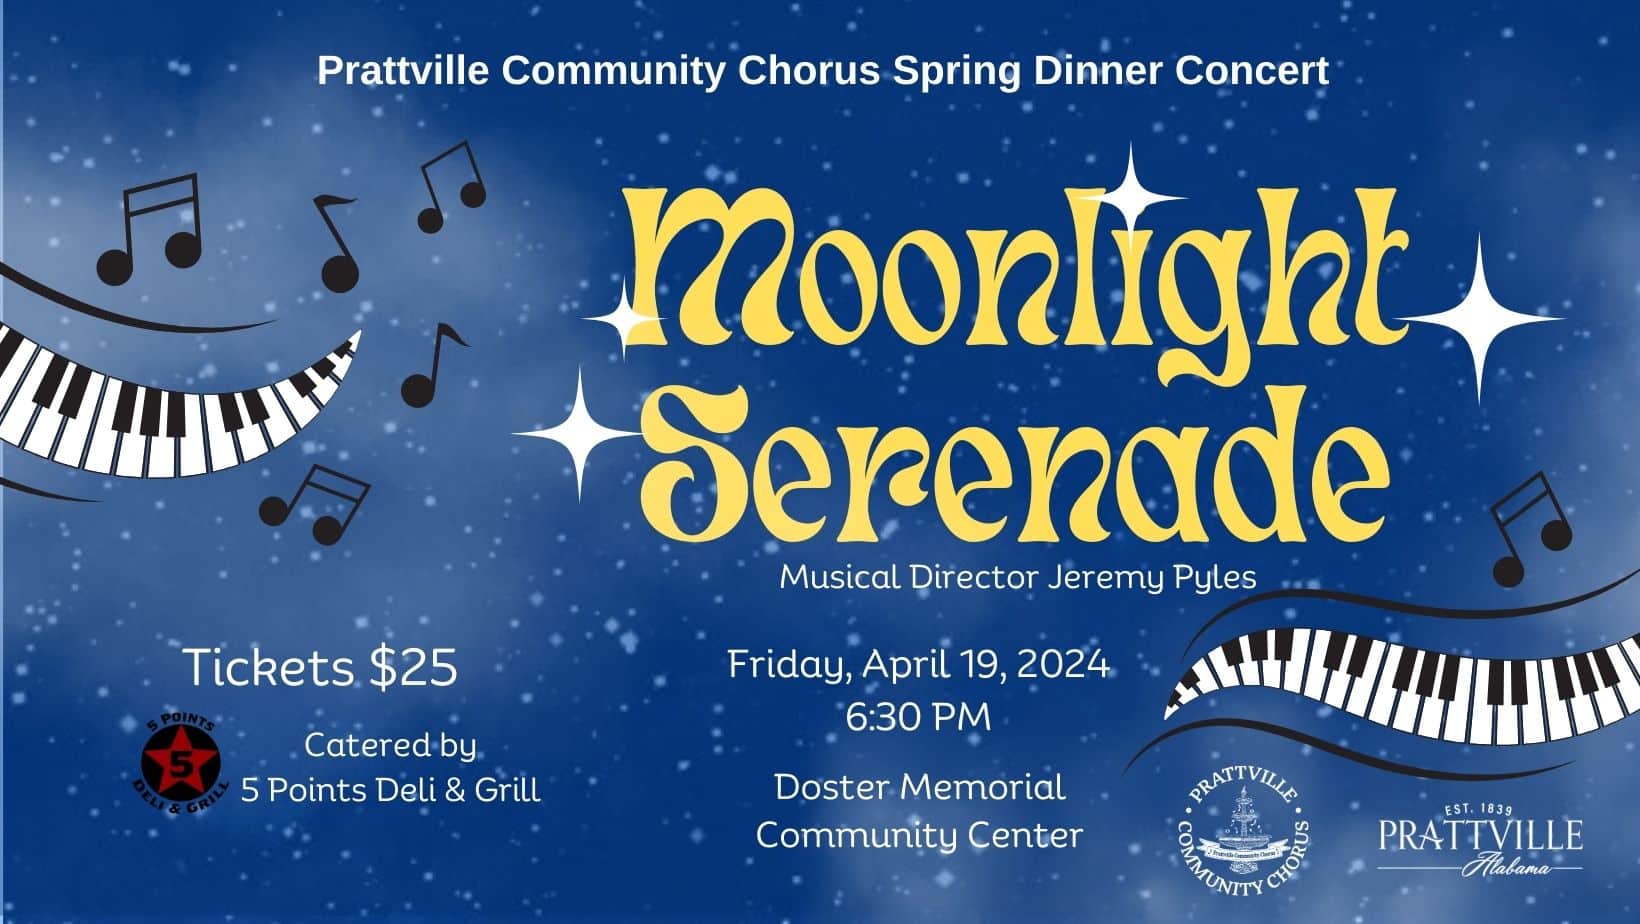 Midnight Serenade Concert and Dinner presented by the Prattville Community Chorus